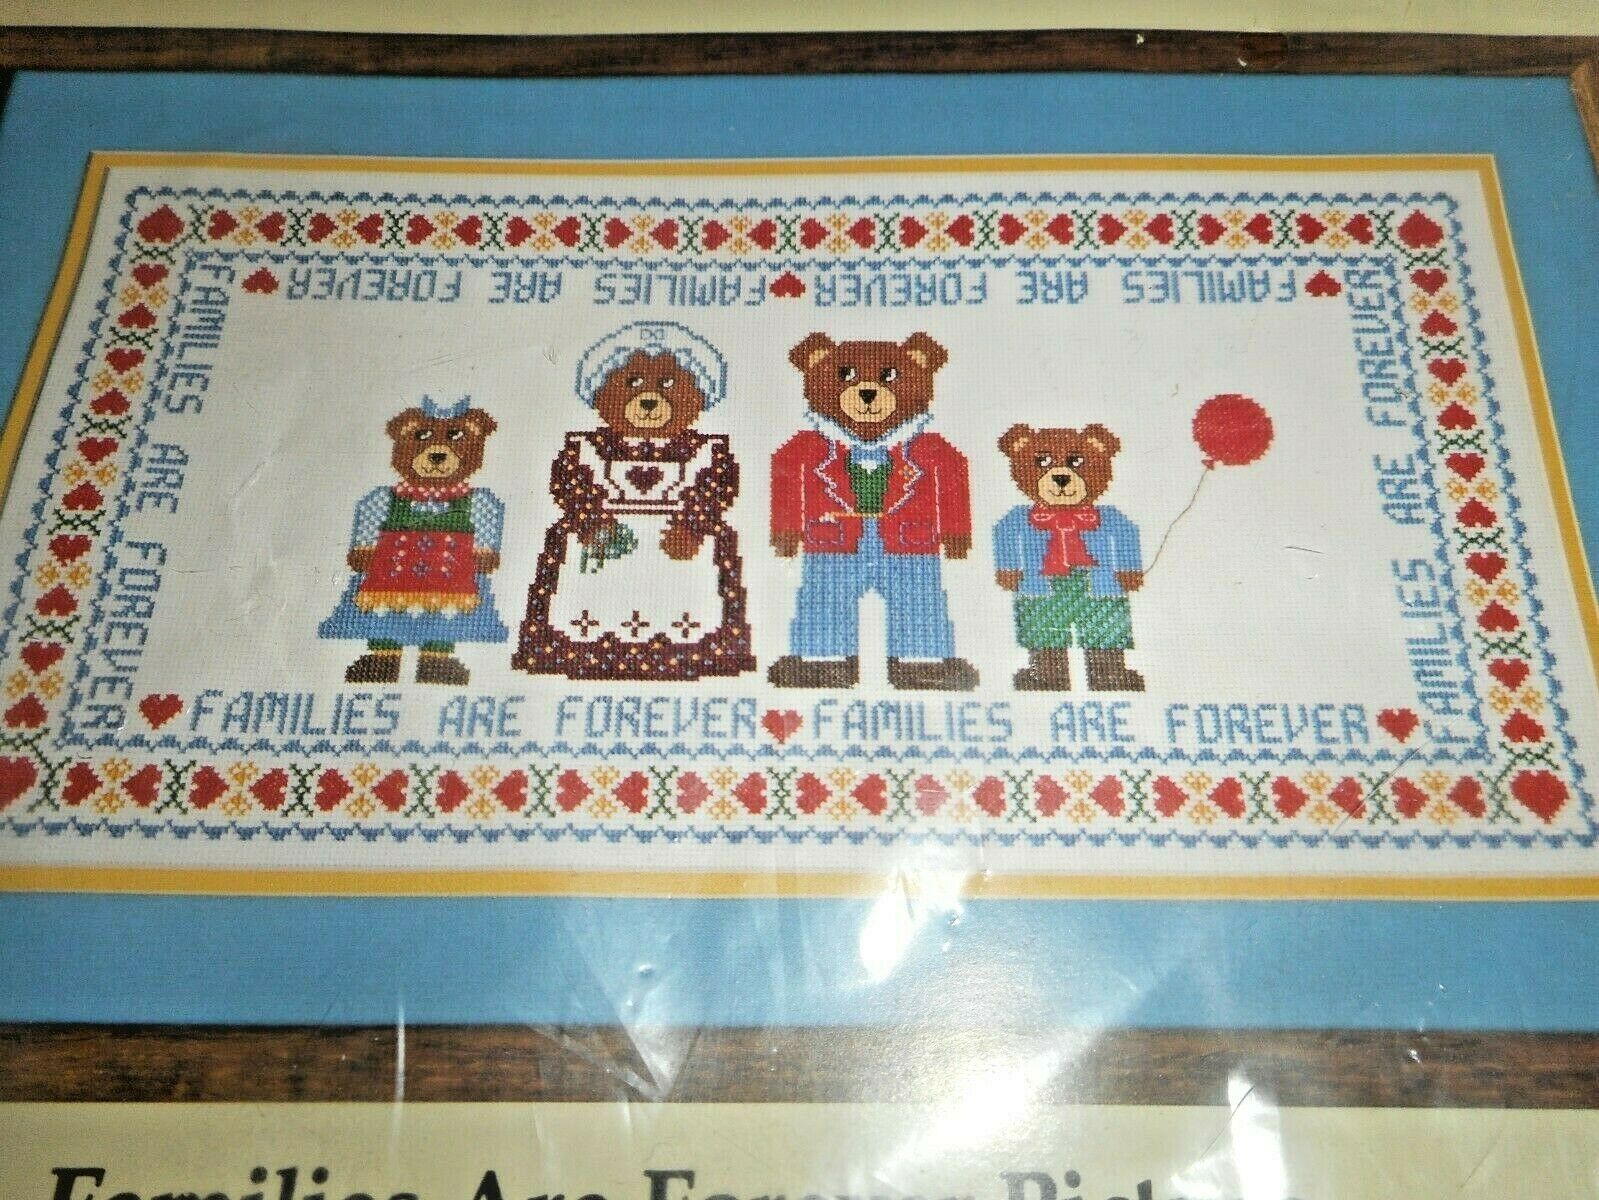 CANDAMAR DESIGN 1986 FAMILIES ARE FOREVER Teddy Bear Cross Stitch Kit #50224 - $19.99